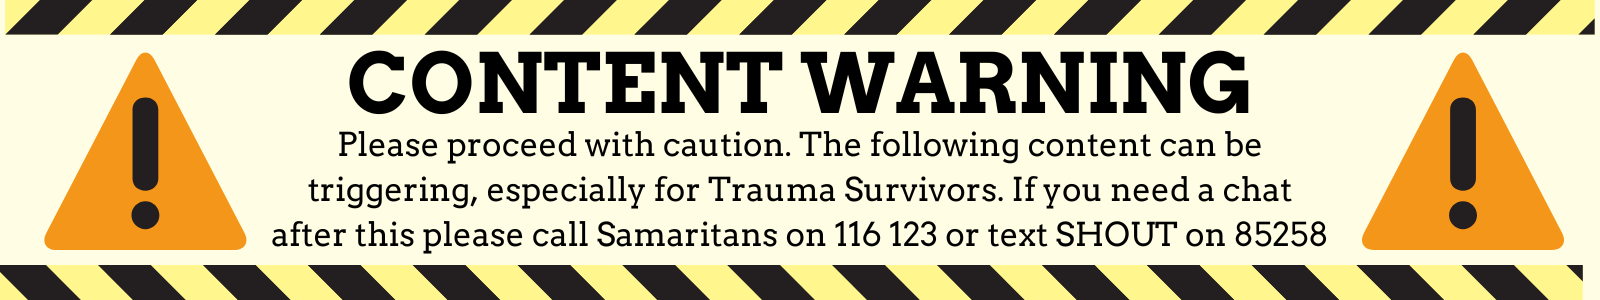 CONTENT WARNING: PLEASE PROCEED WITH CAUTION.
THE FOLLOWING CONTENT CAN BE TRIGGERING, ESPECIALLY FOR TRAUMA SURVIVORS. IF YOU NEED A CHAT AFTER THIS, PLEASE CALL SAMARITANS ON 116 123 OR TEXT SHOUT ON 85258